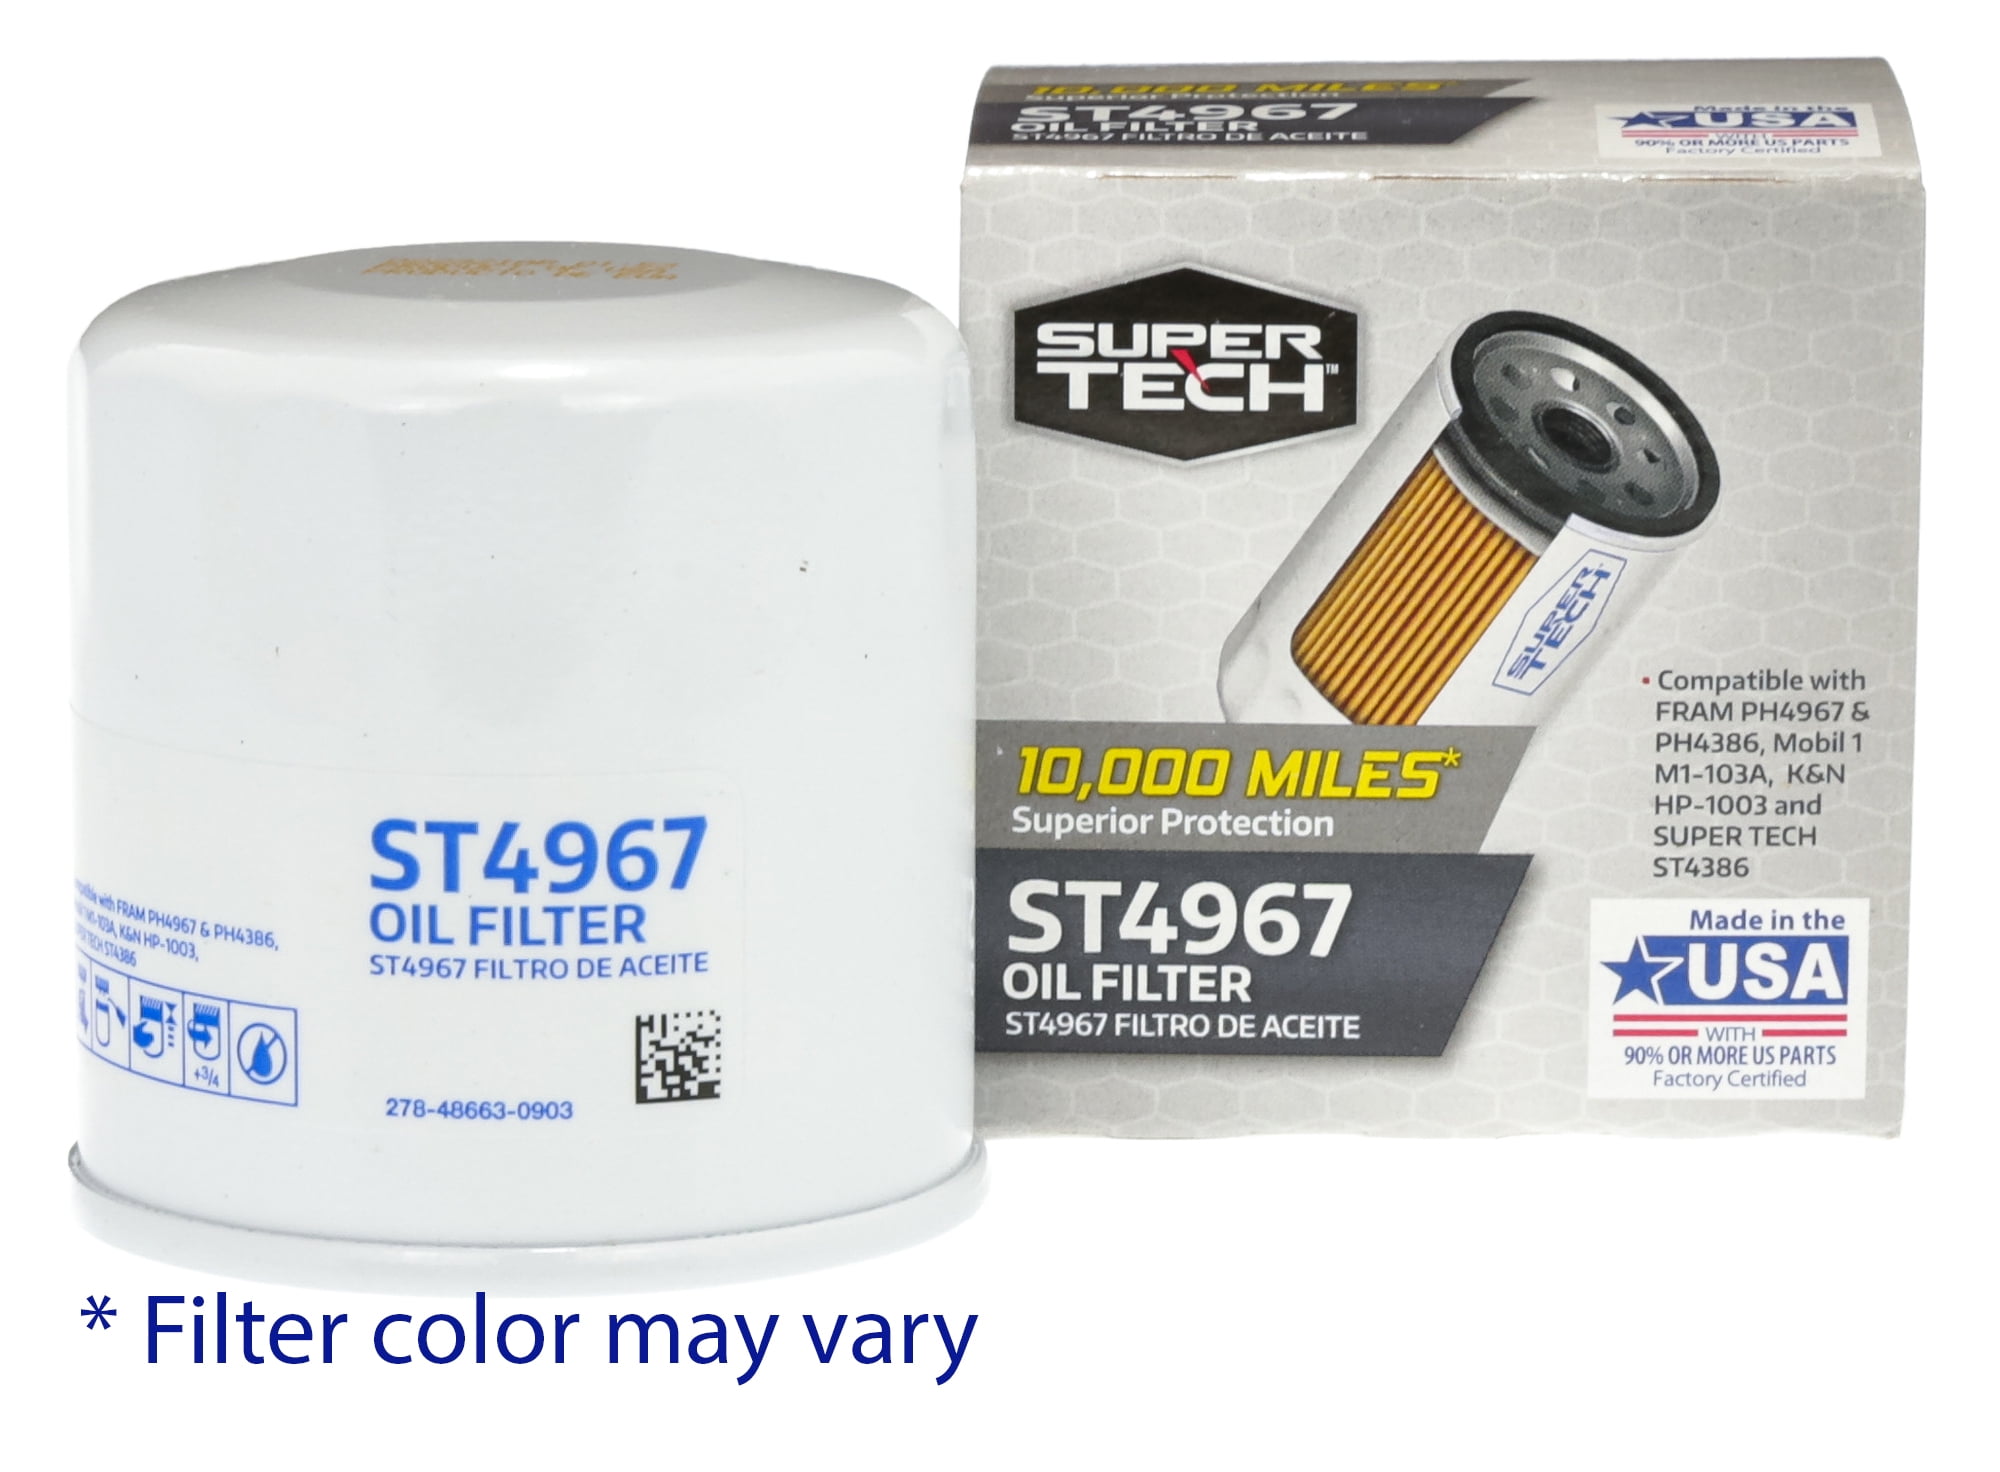 SuperTech 10K mile Spin-on Oil Filter, ST4967, for Daihatsu, Lexus and Toyota